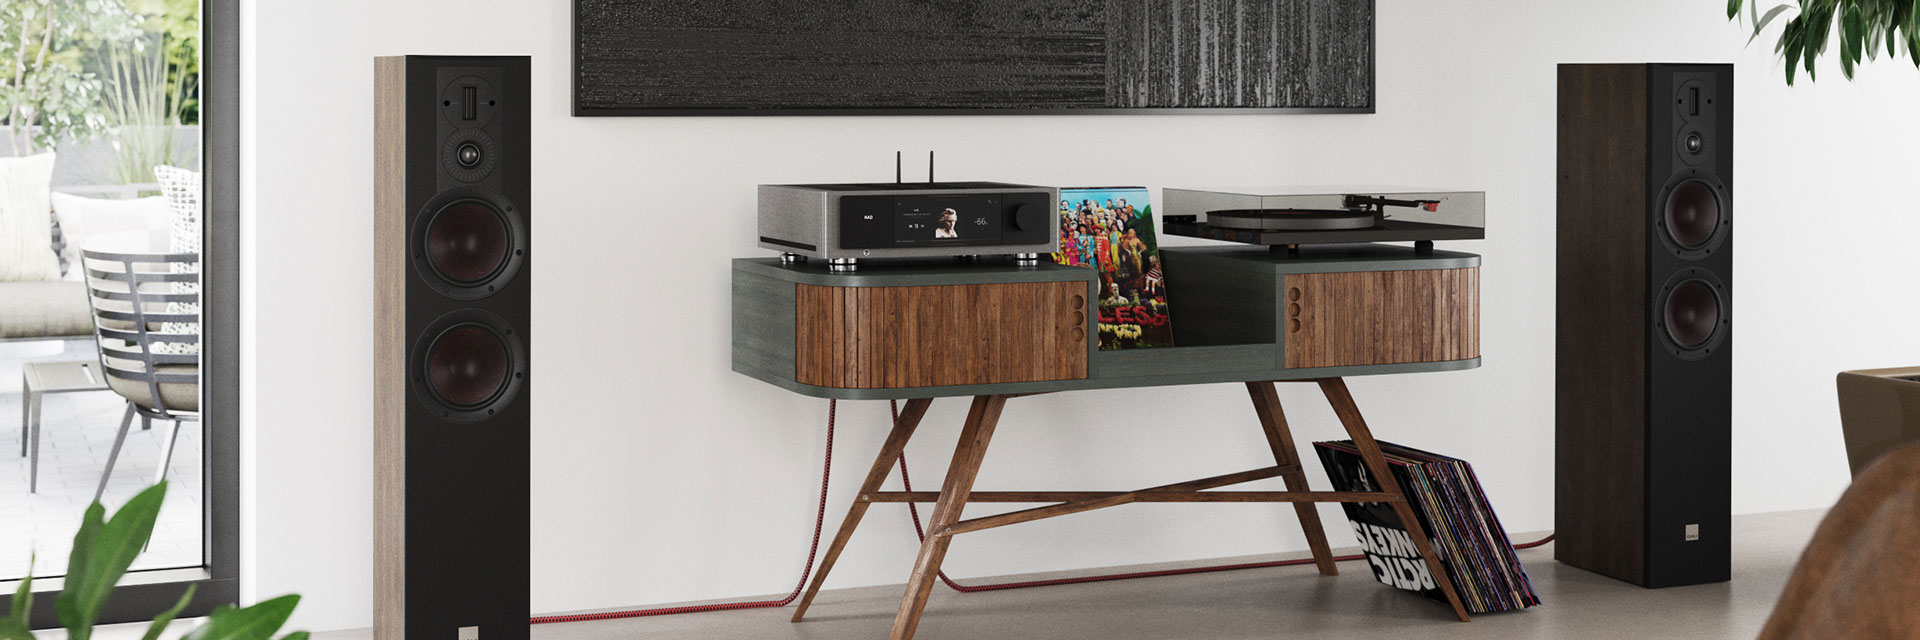 DALI OPTICON MK2 Loudspeakers in tobacco oak, NAD M33 BluOS Streaming DAC Amplifier, and C 558 Turntable.